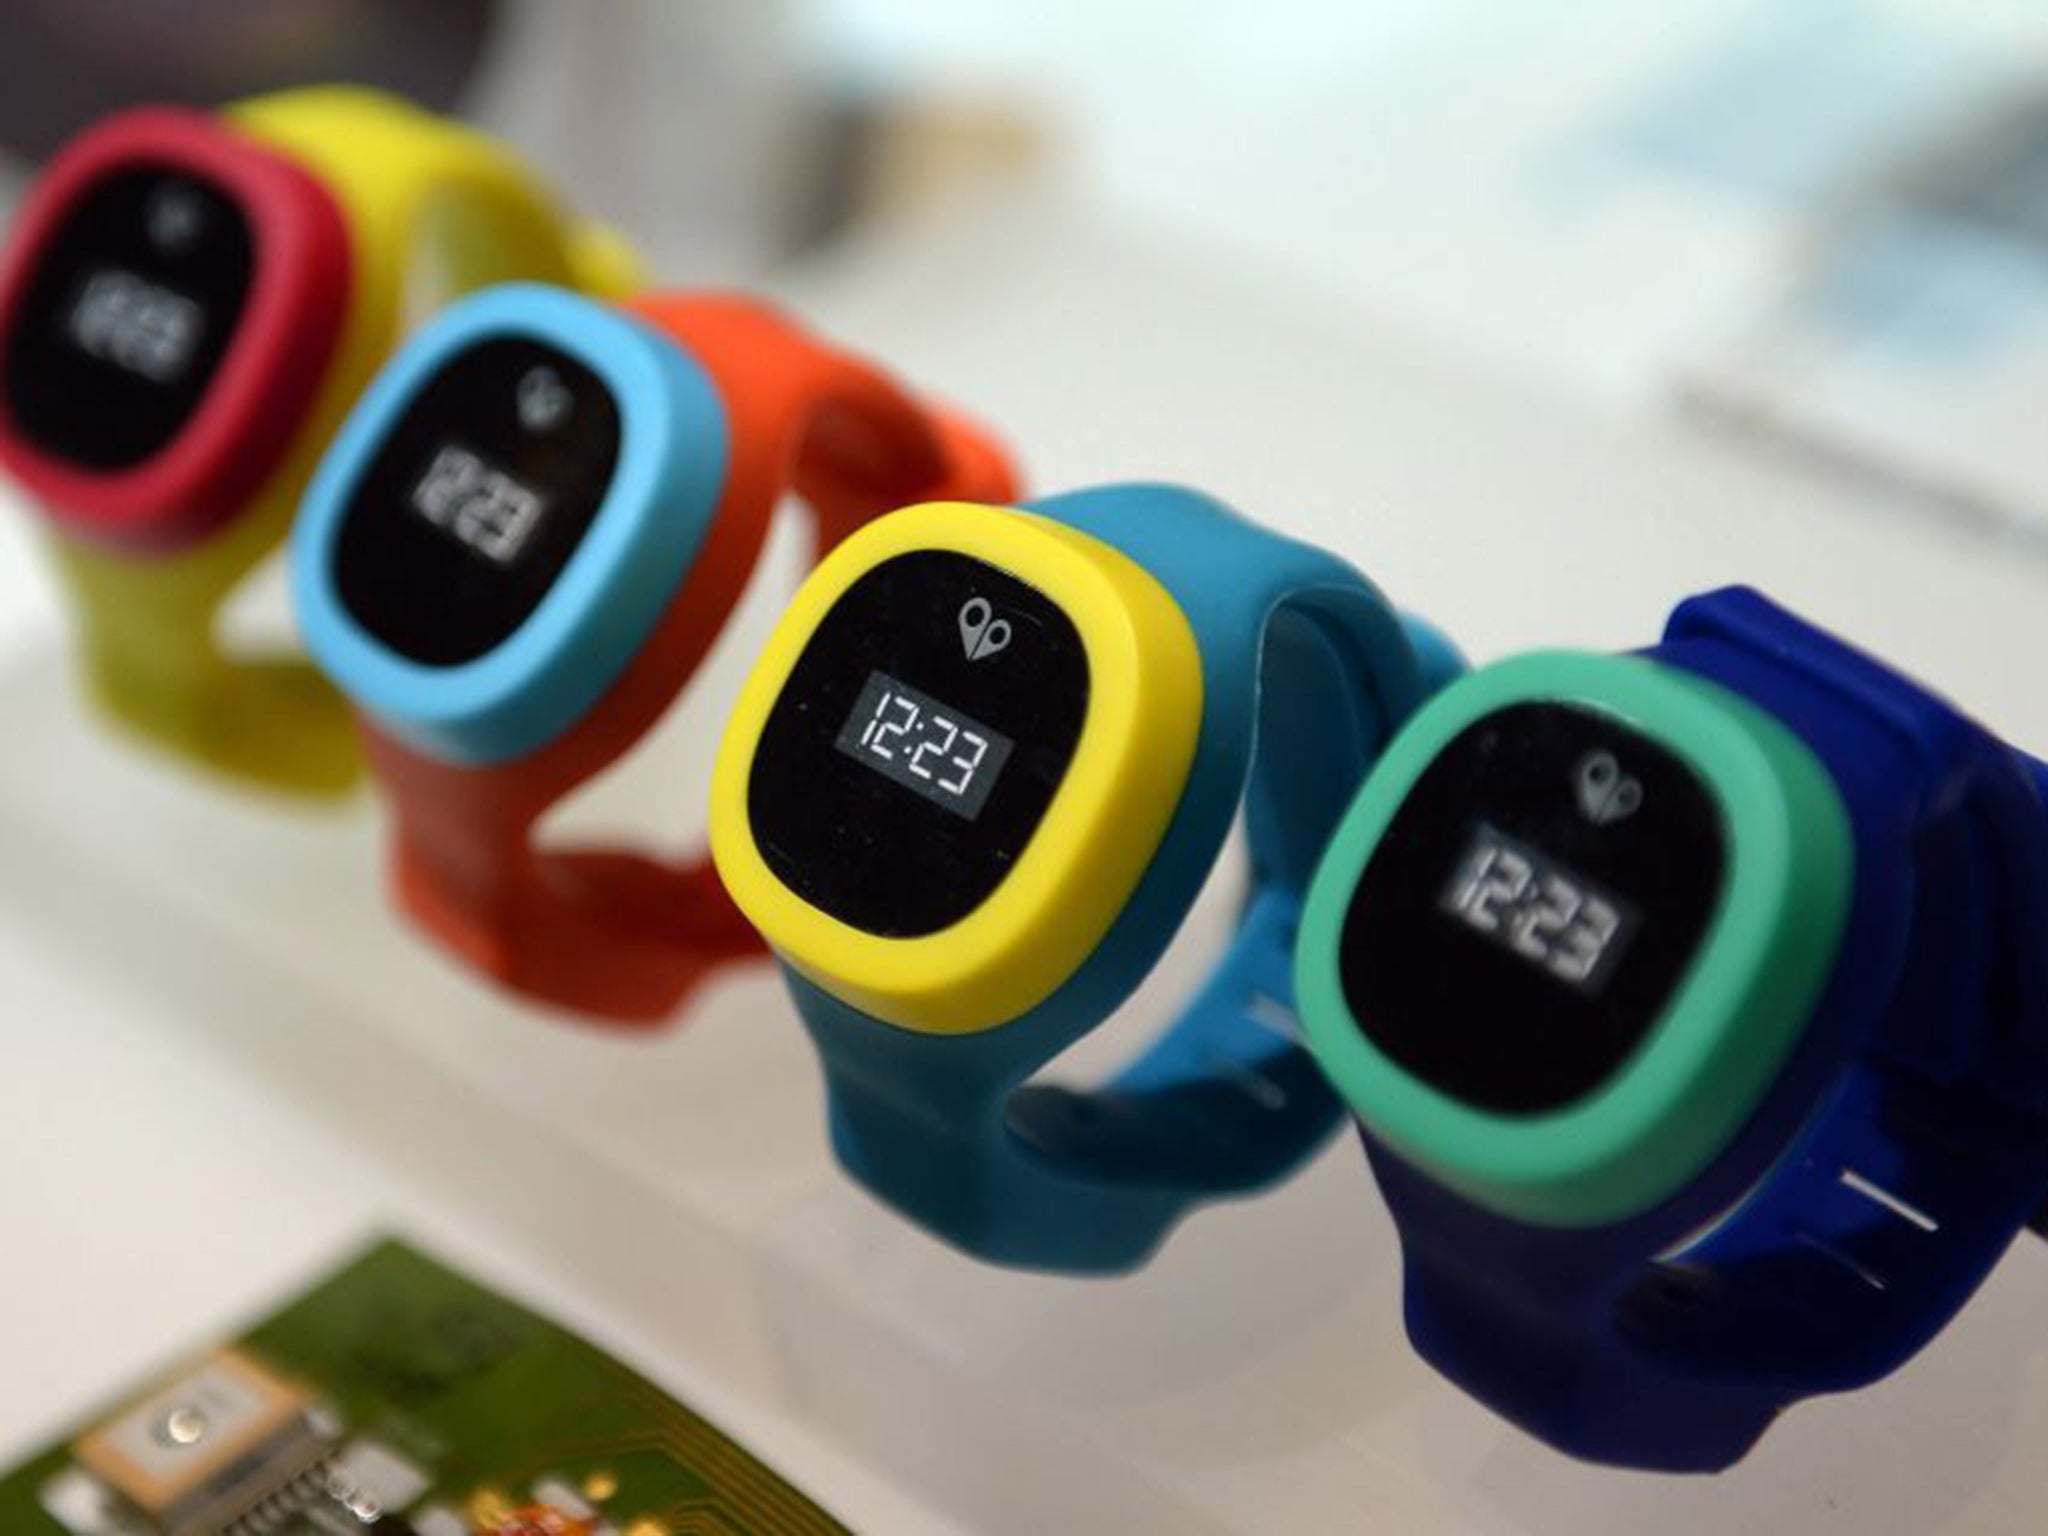 HereO children’s watches, equipped with GPS so parents can locate their offspring, are on display at the International Consumer Electronics Show (CES) in Las Vegas (EPA)